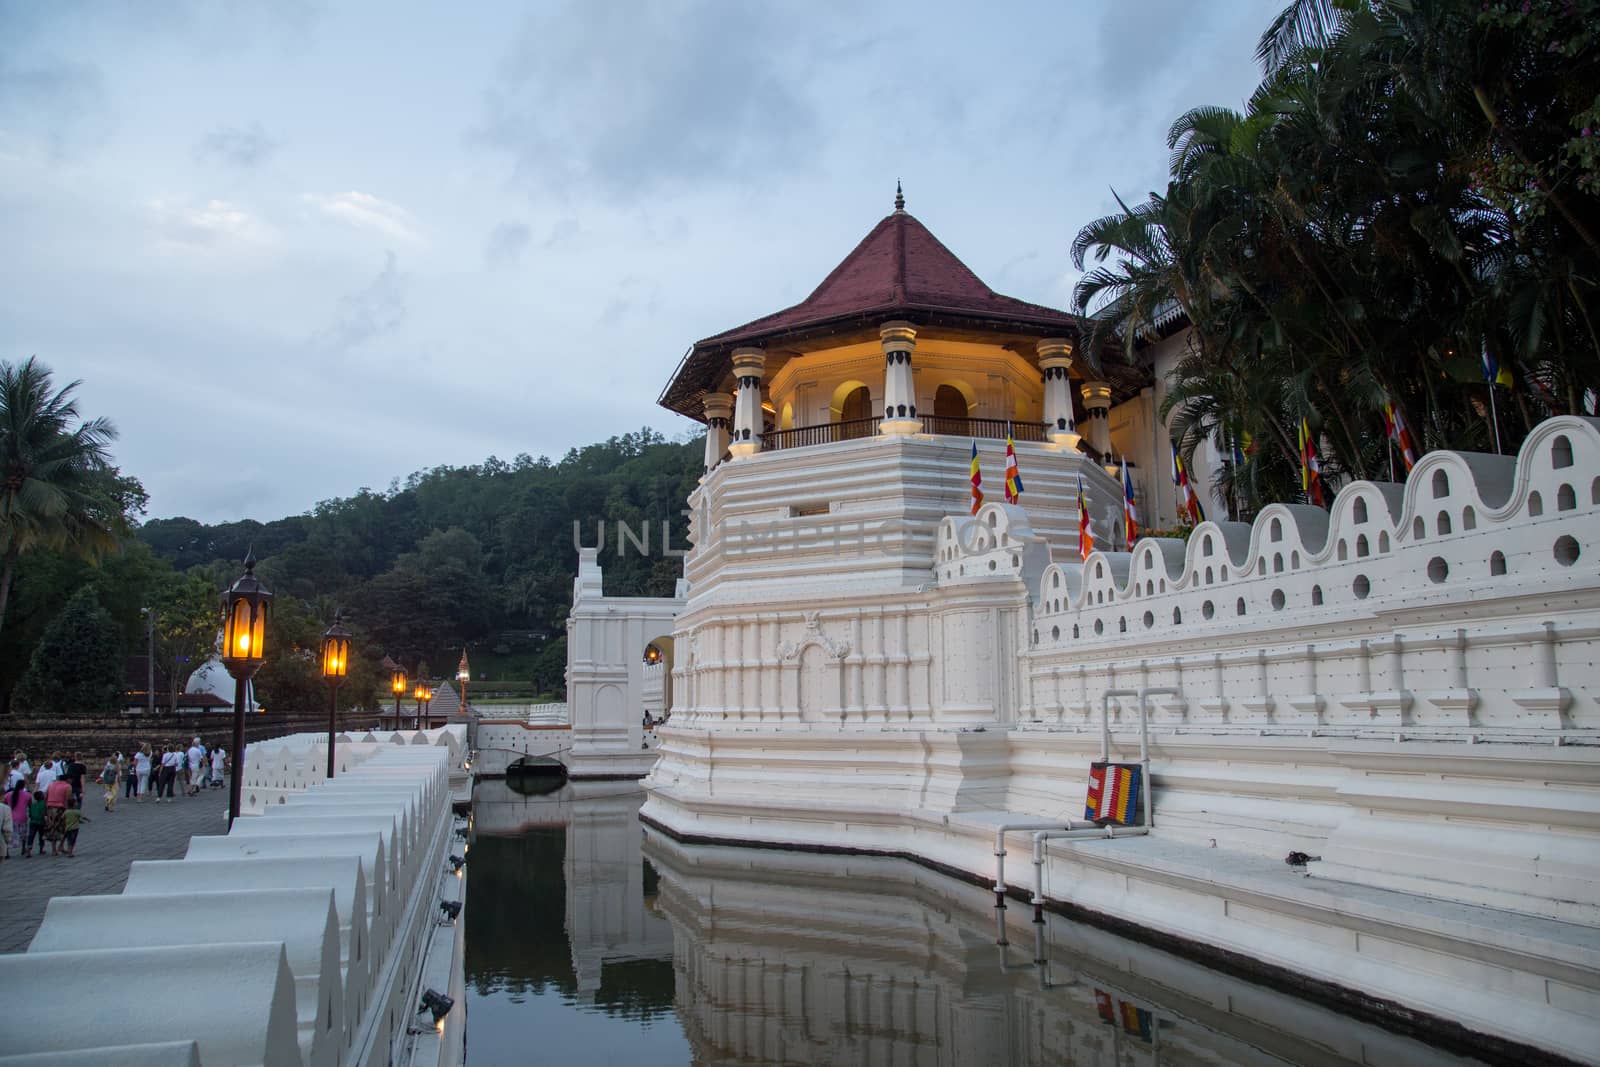 Kandy, Sri Lanka - August 9, 2018: The Temple of the sacred tooth relic, a Buddhist temple which is located in the royal palace complex of the former Kingdom of Kandy.